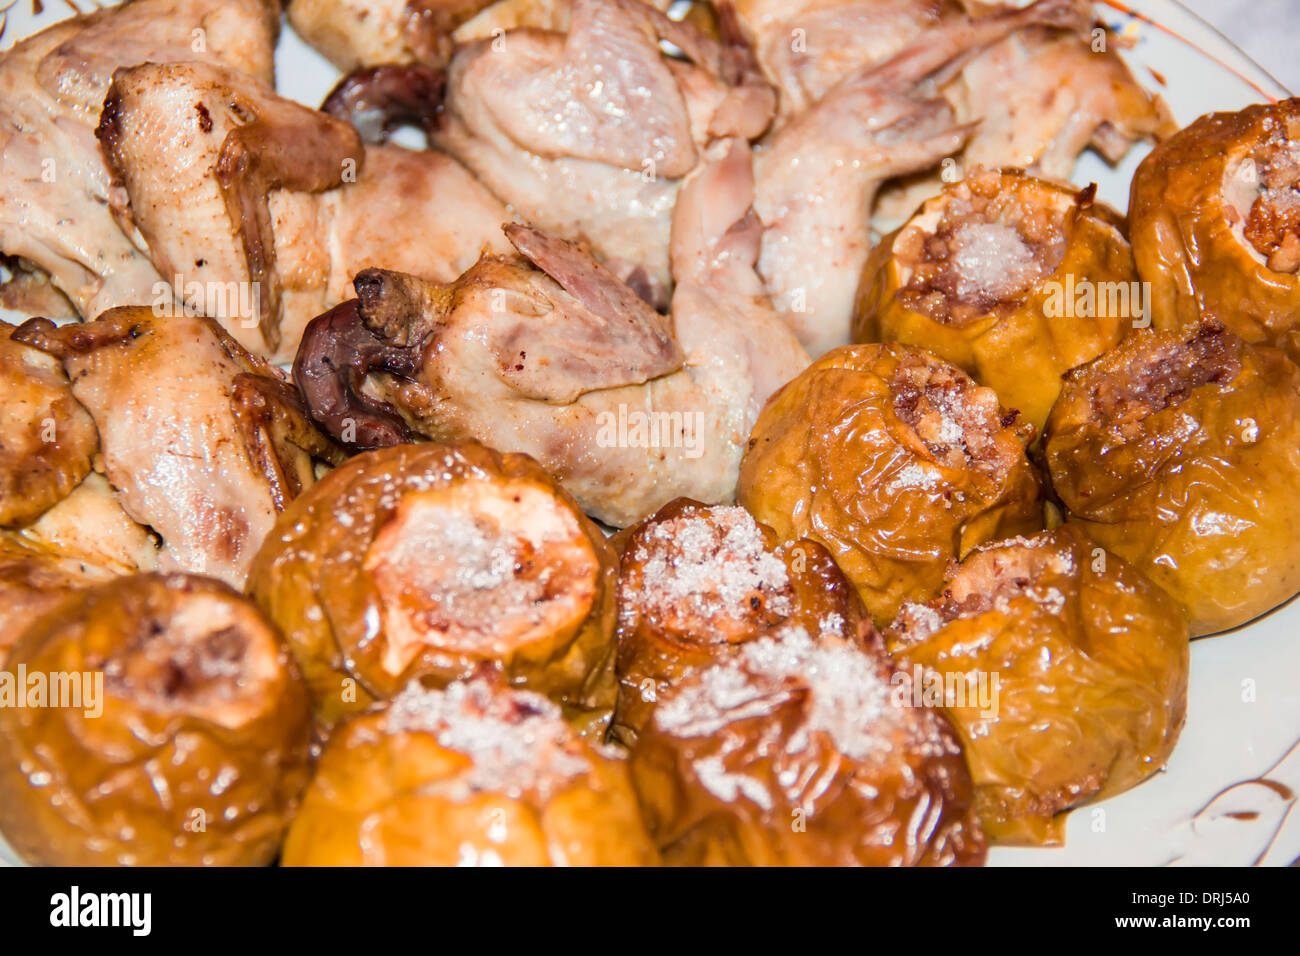 quail on apples with honey and nuts Stock Photo